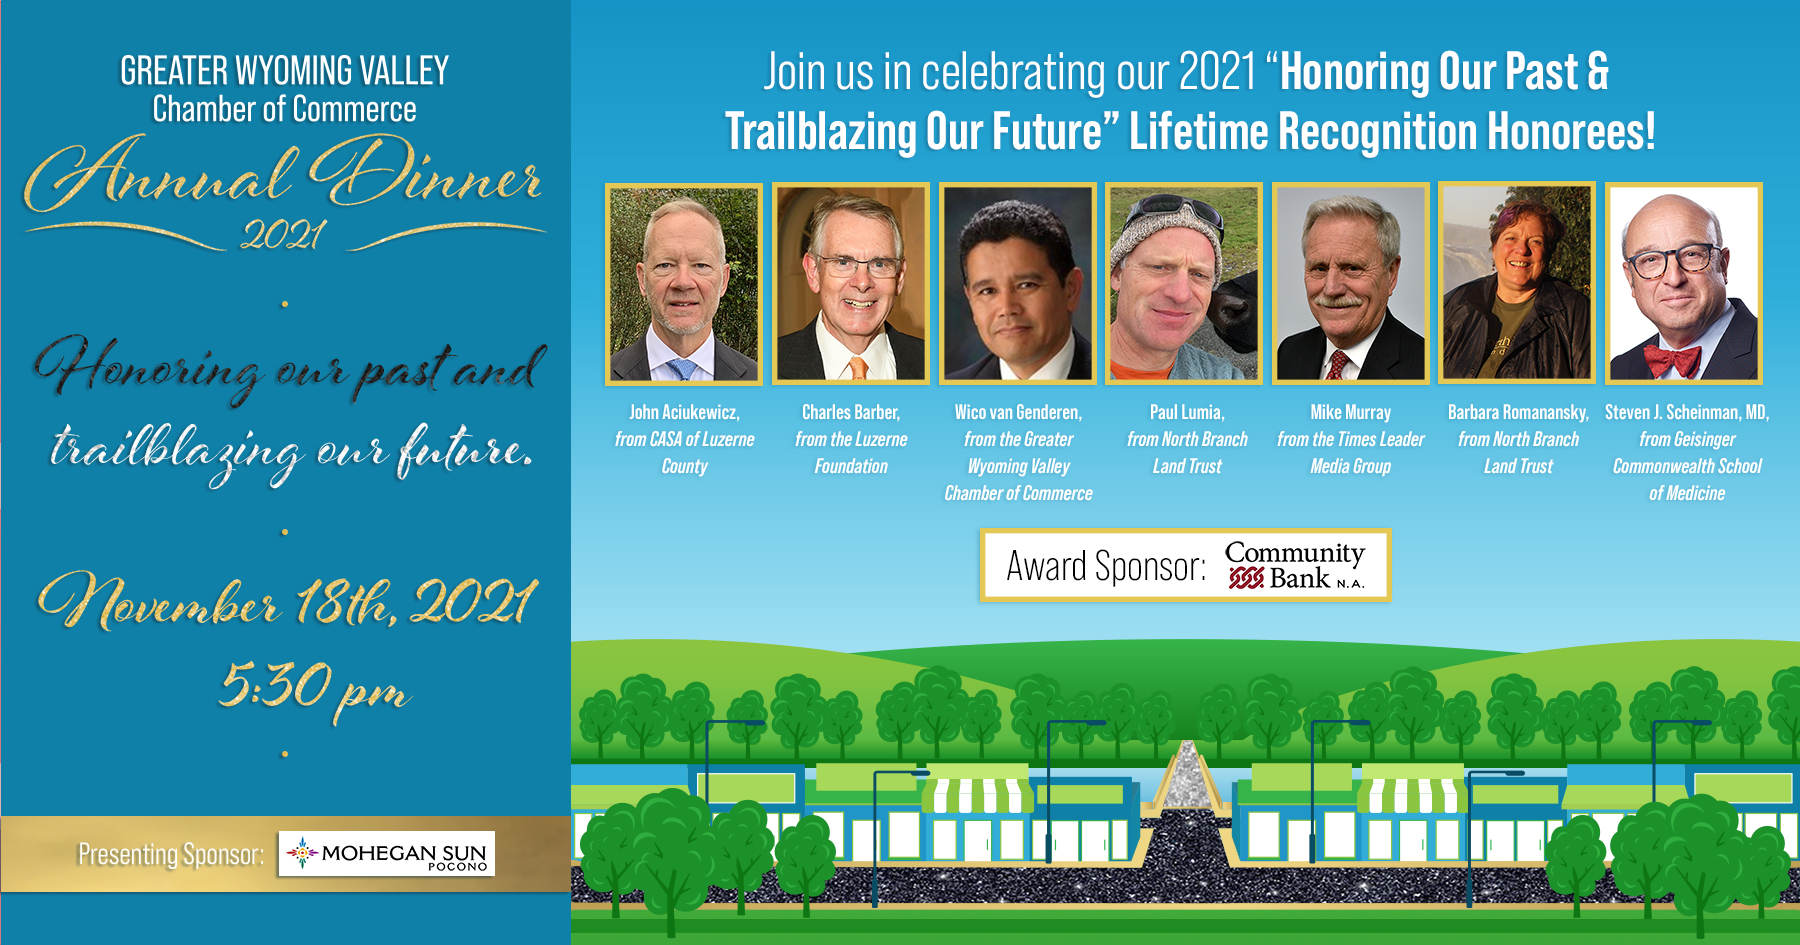 Image for Meet Our 2021 “Honoring Our Past & Trailblazing Our Future” Lifetime Recognition Honorees!